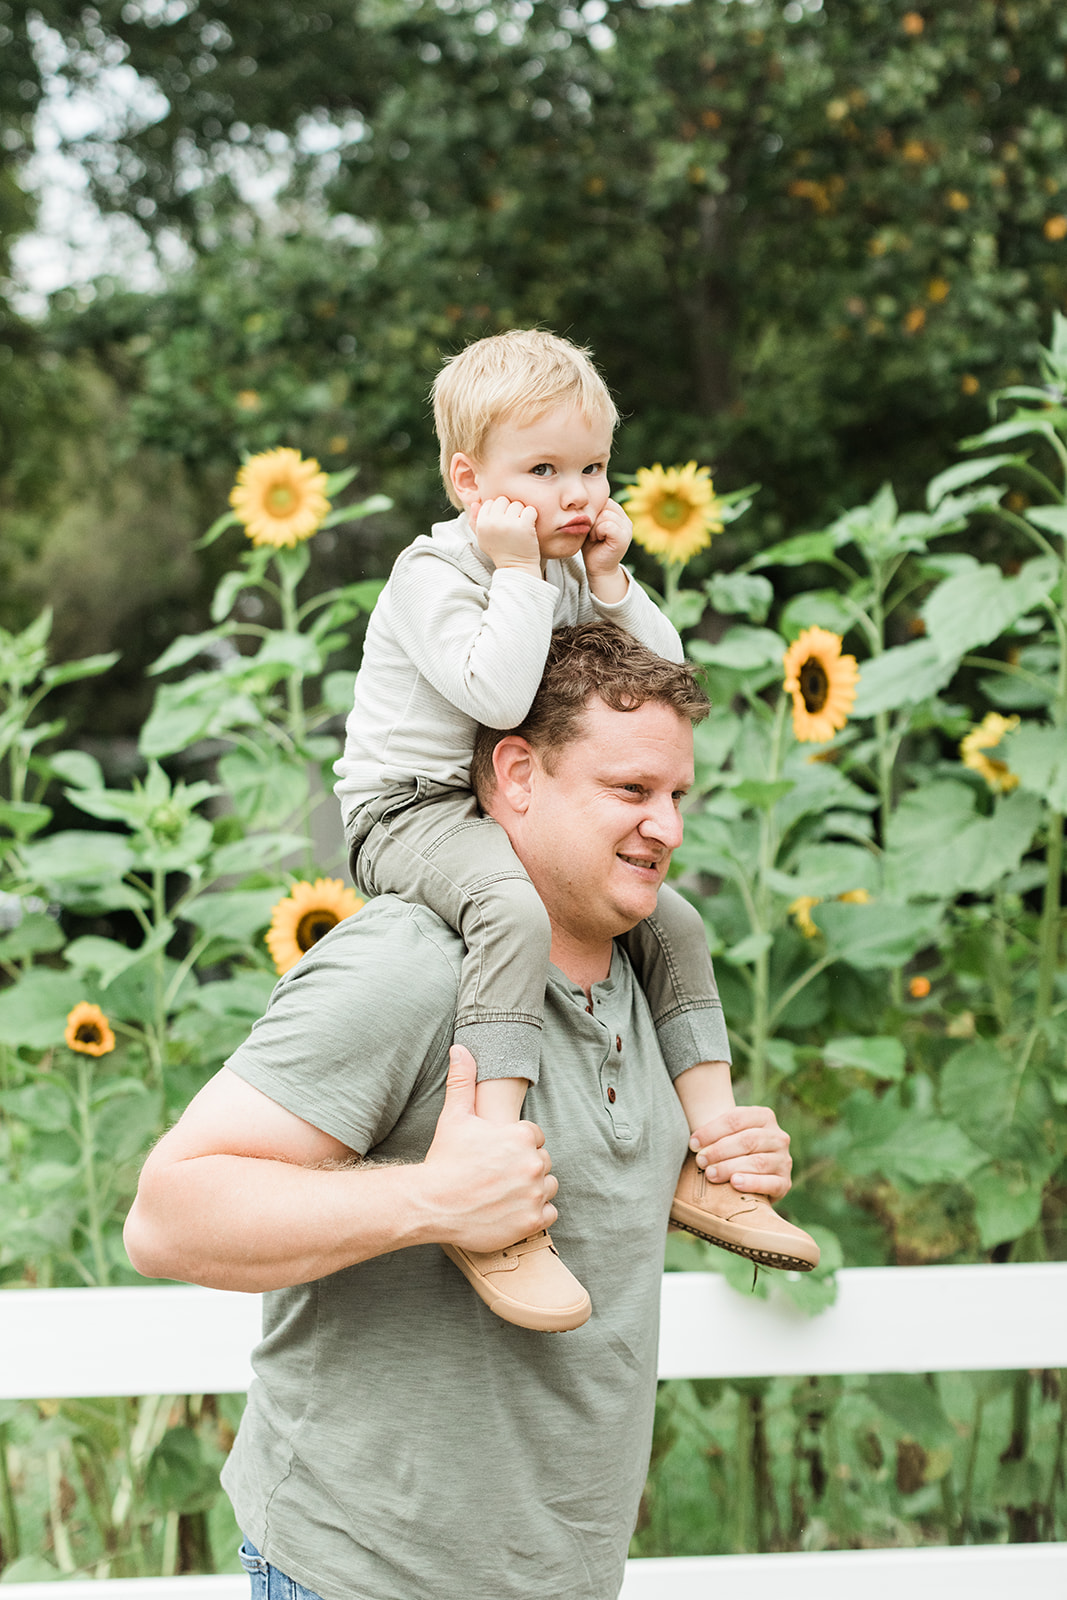 outdoor family session in nashville tennessee. little boy on dad's shoulder